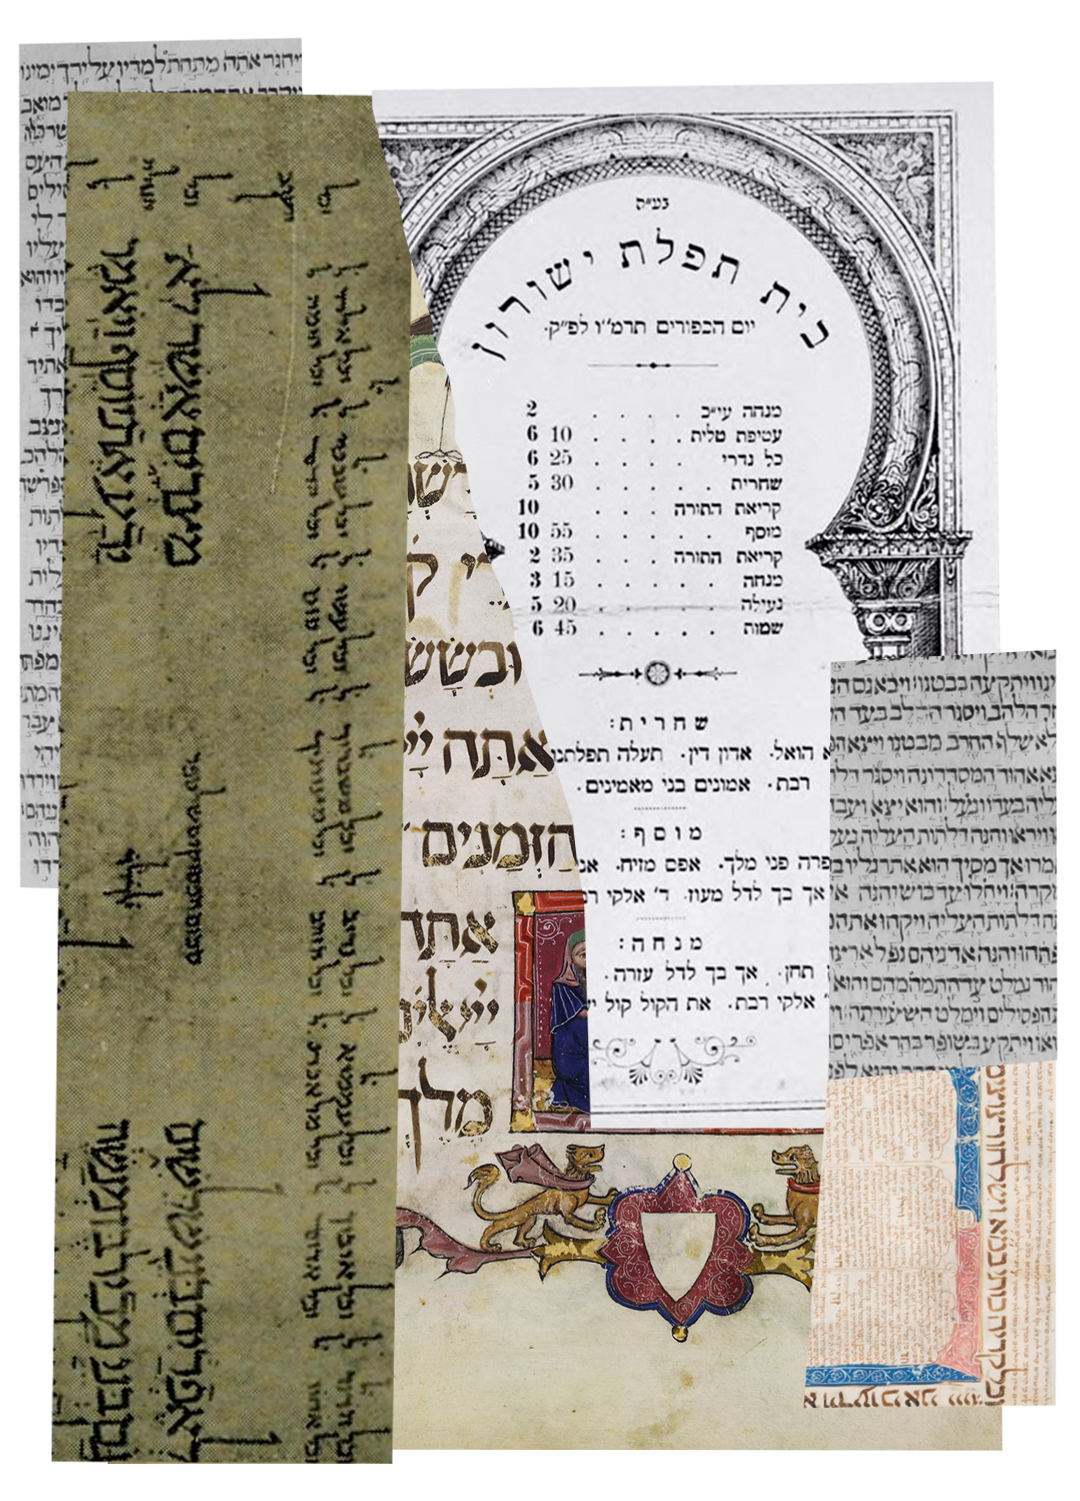 Thousands of Hebrew manuscript fragments were discovered in Central Europe, where they had been used by Christians to bind books